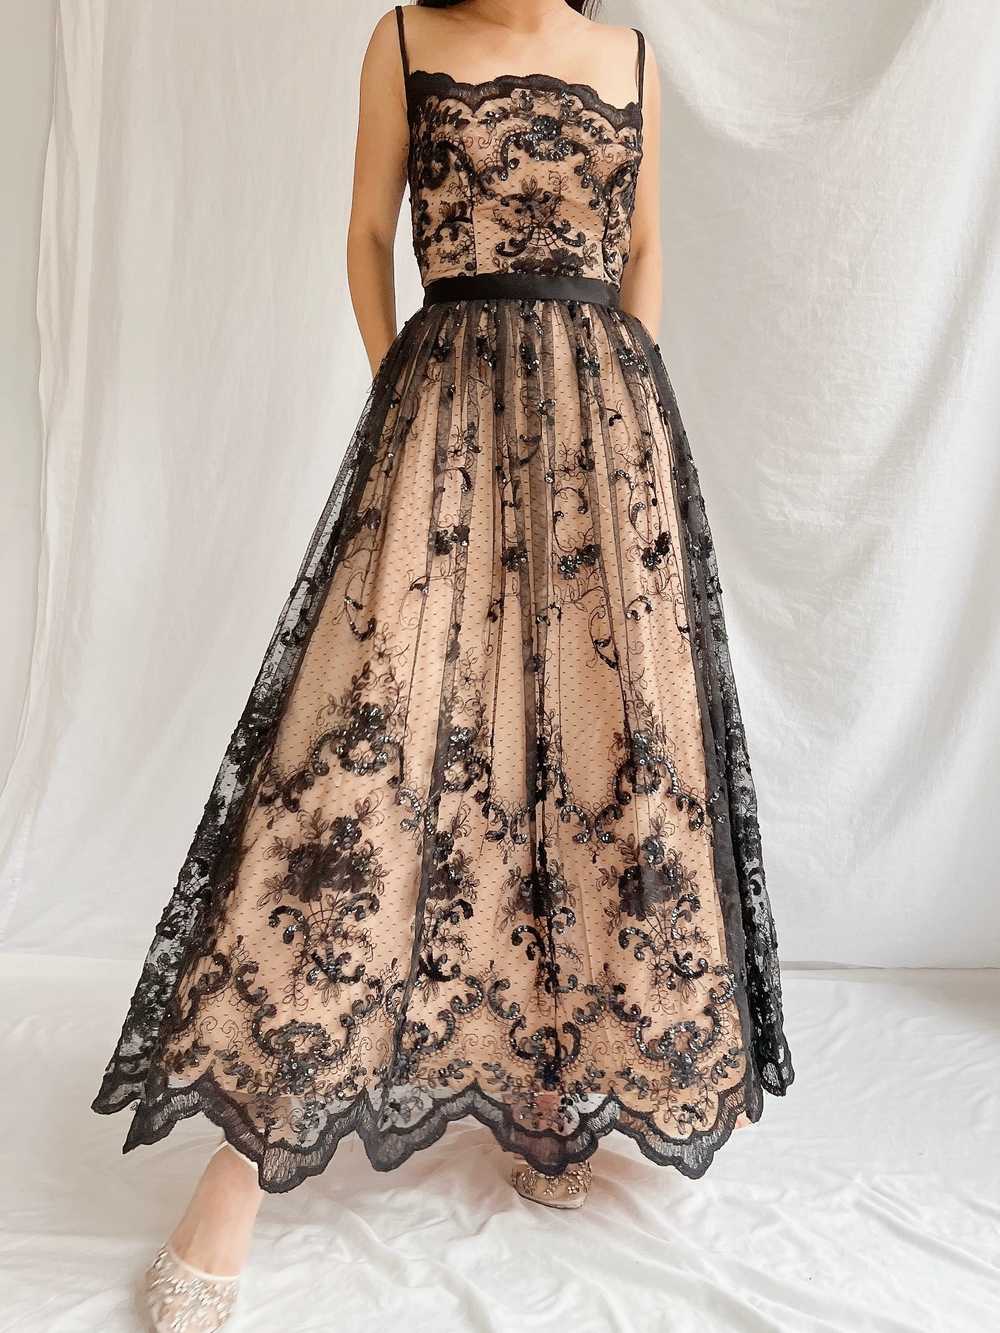 Vintage Nude and Black Lace Dress - S - image 8